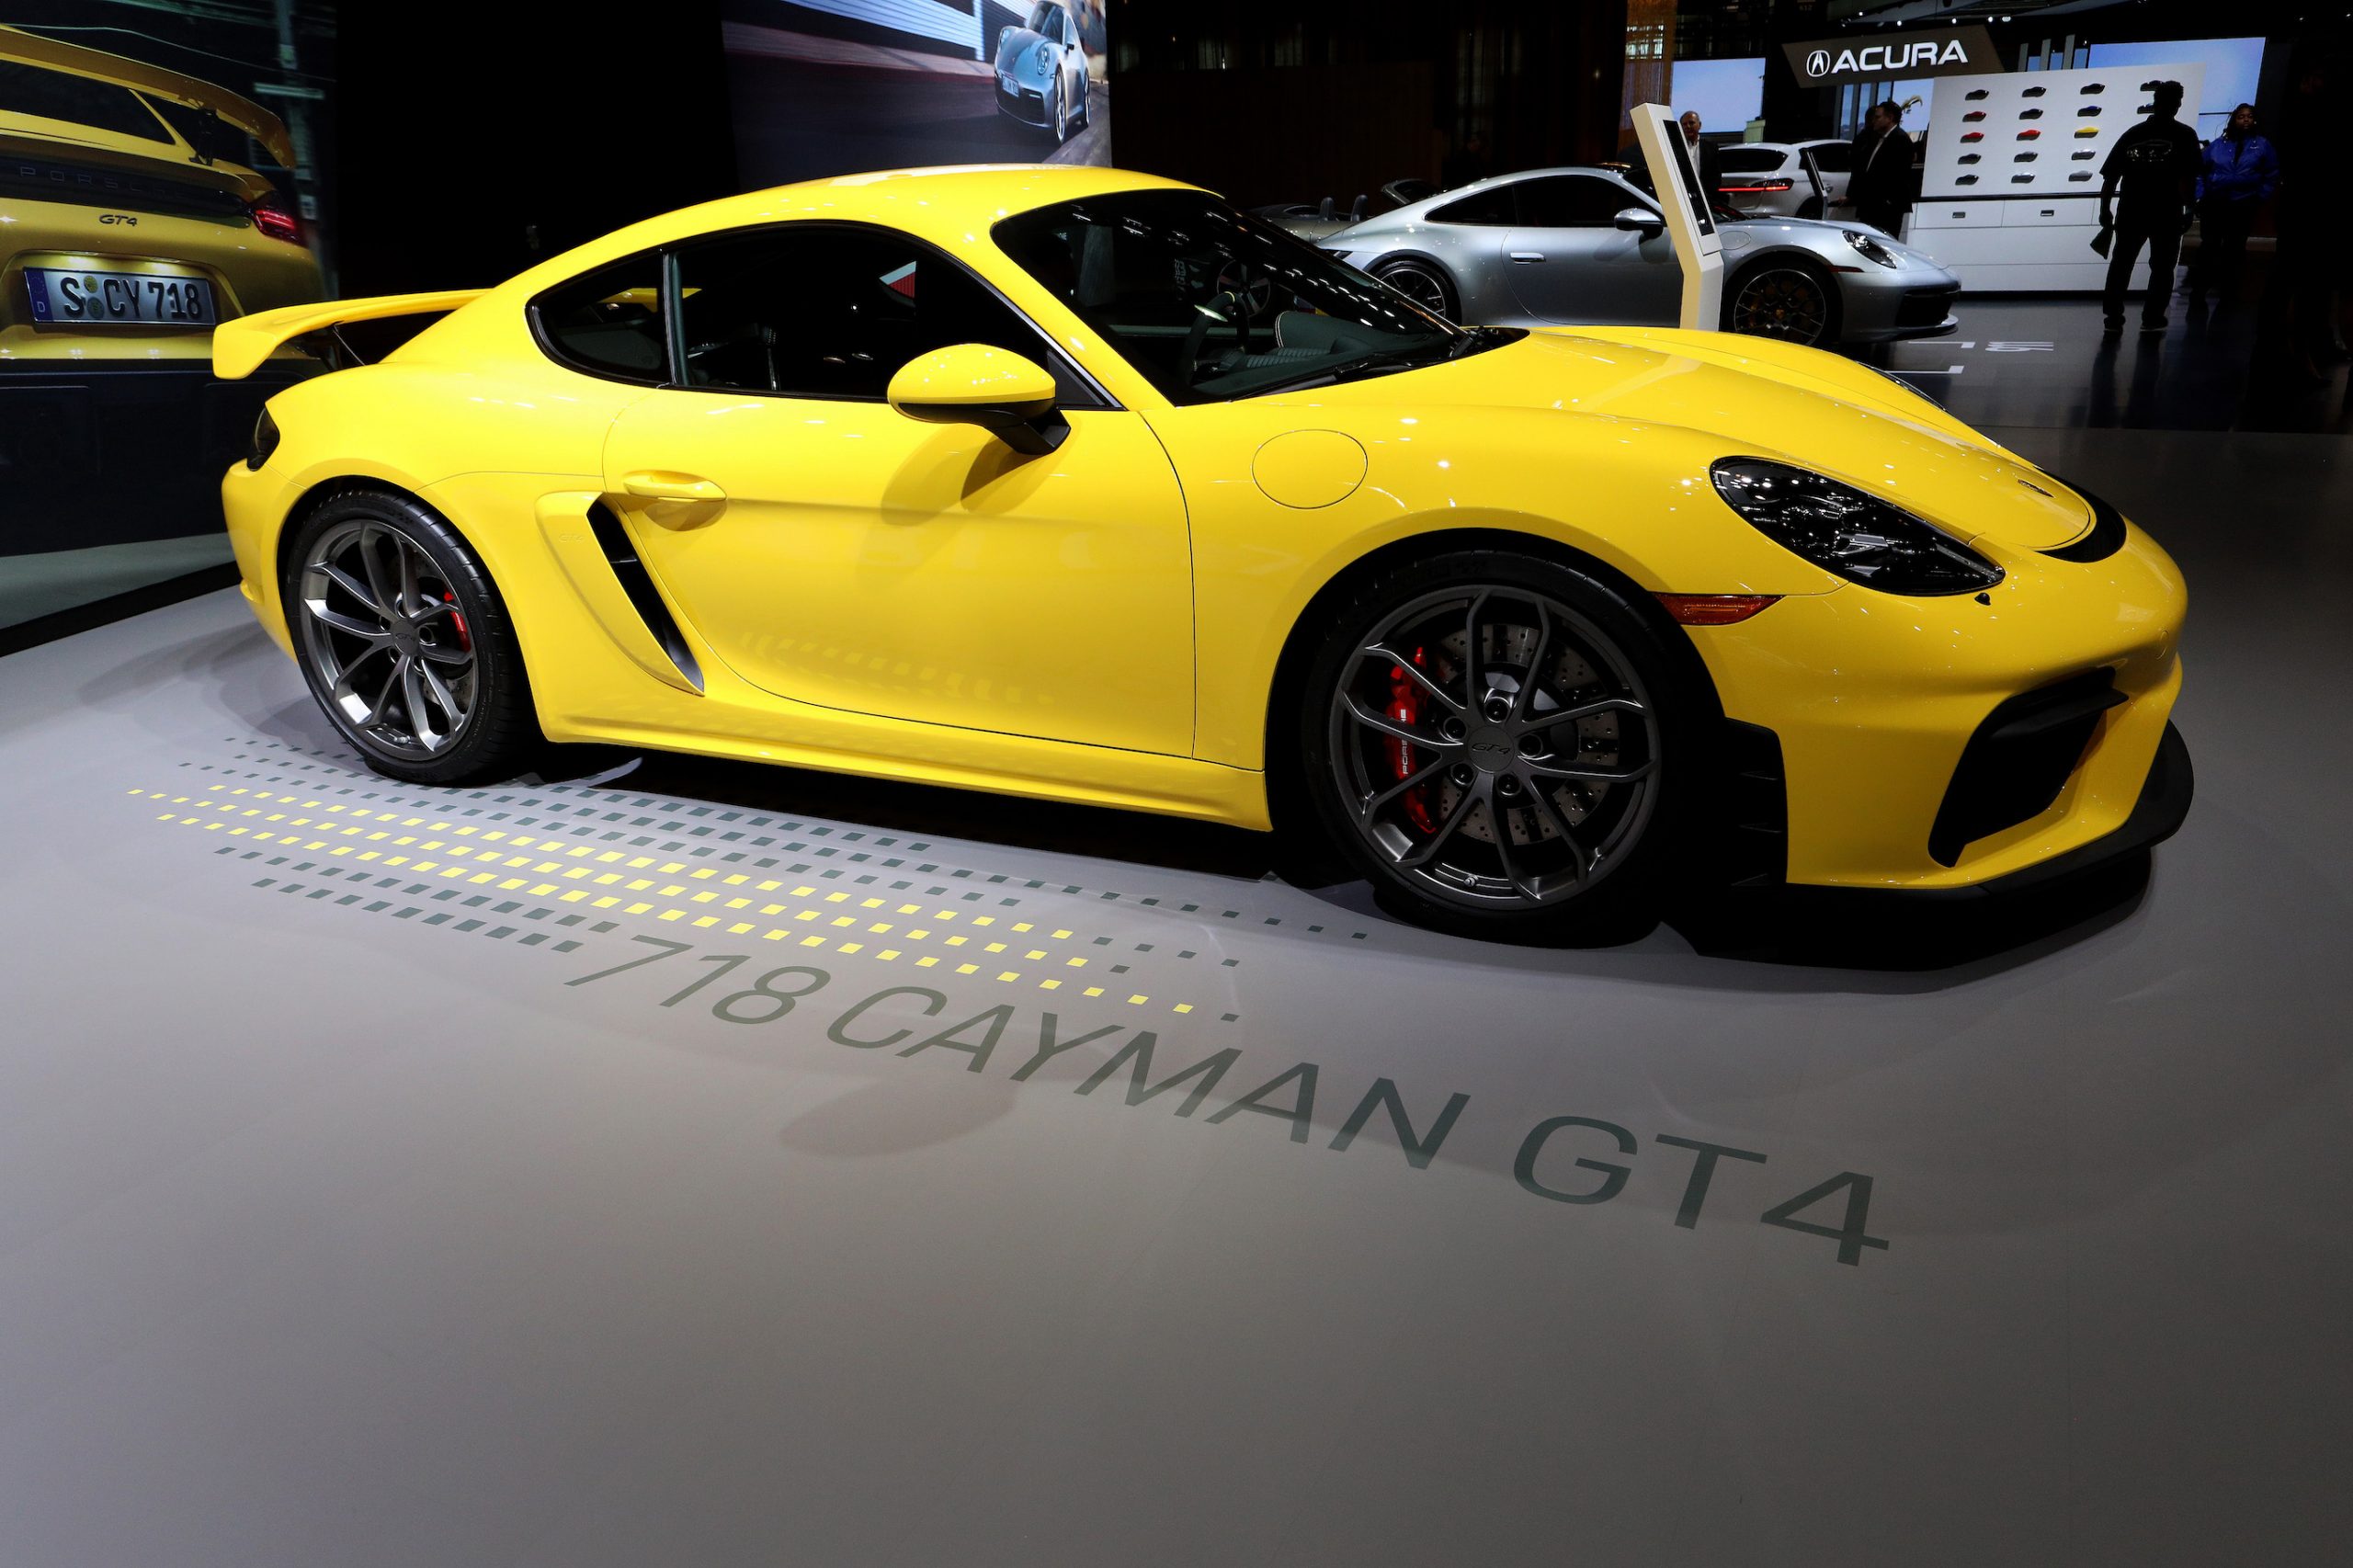 2020 Porsche 718 Cayman GT4 is on display at the 112th Annual Chicago Auto Show at McCormick Place